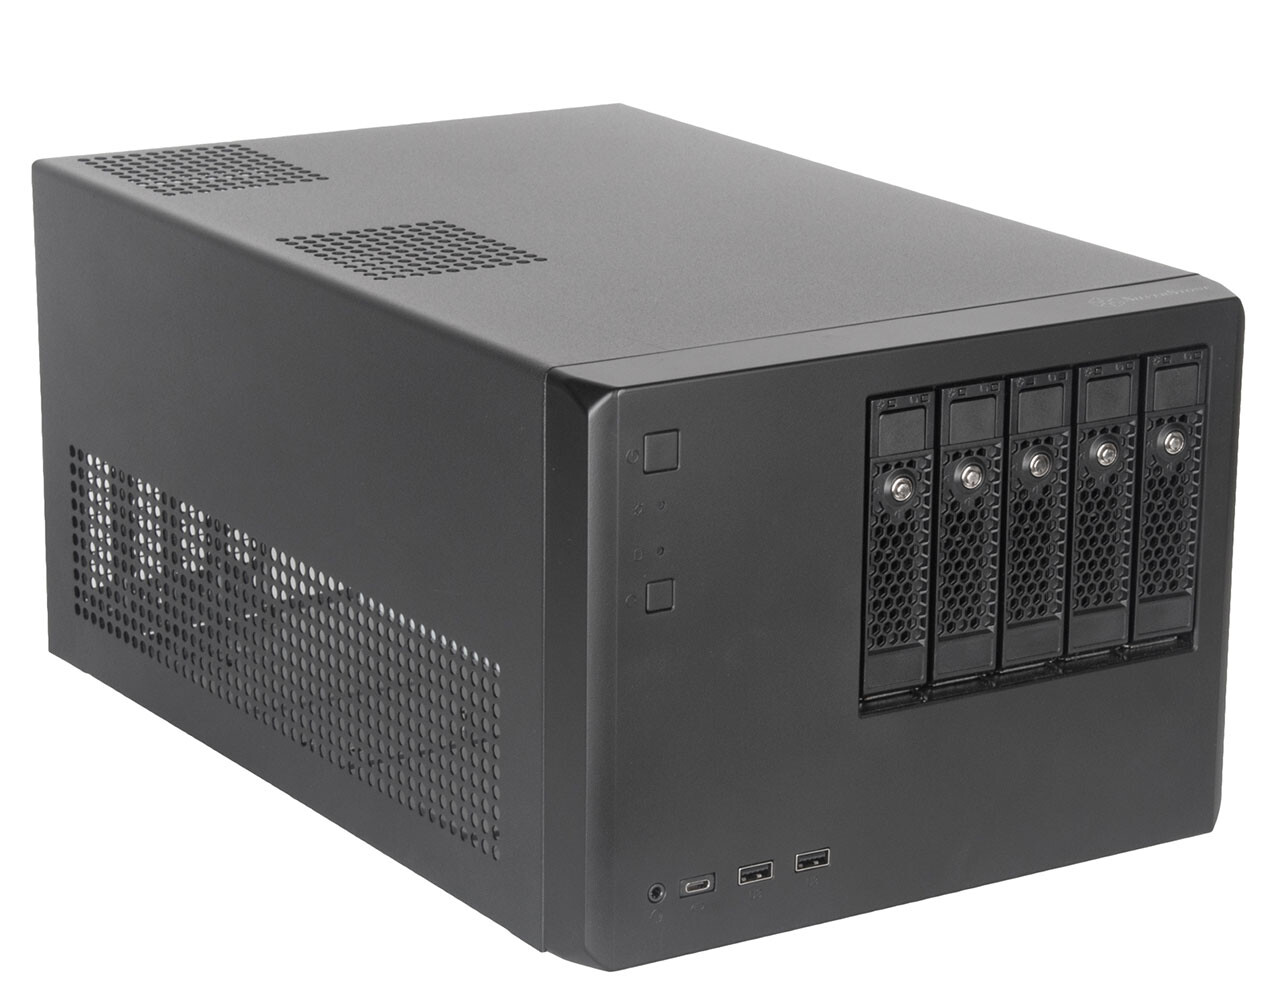 SilverStone Unveils CS351 Micro-ATX Case Builds Intersecting NAS+Gaming Use- cases